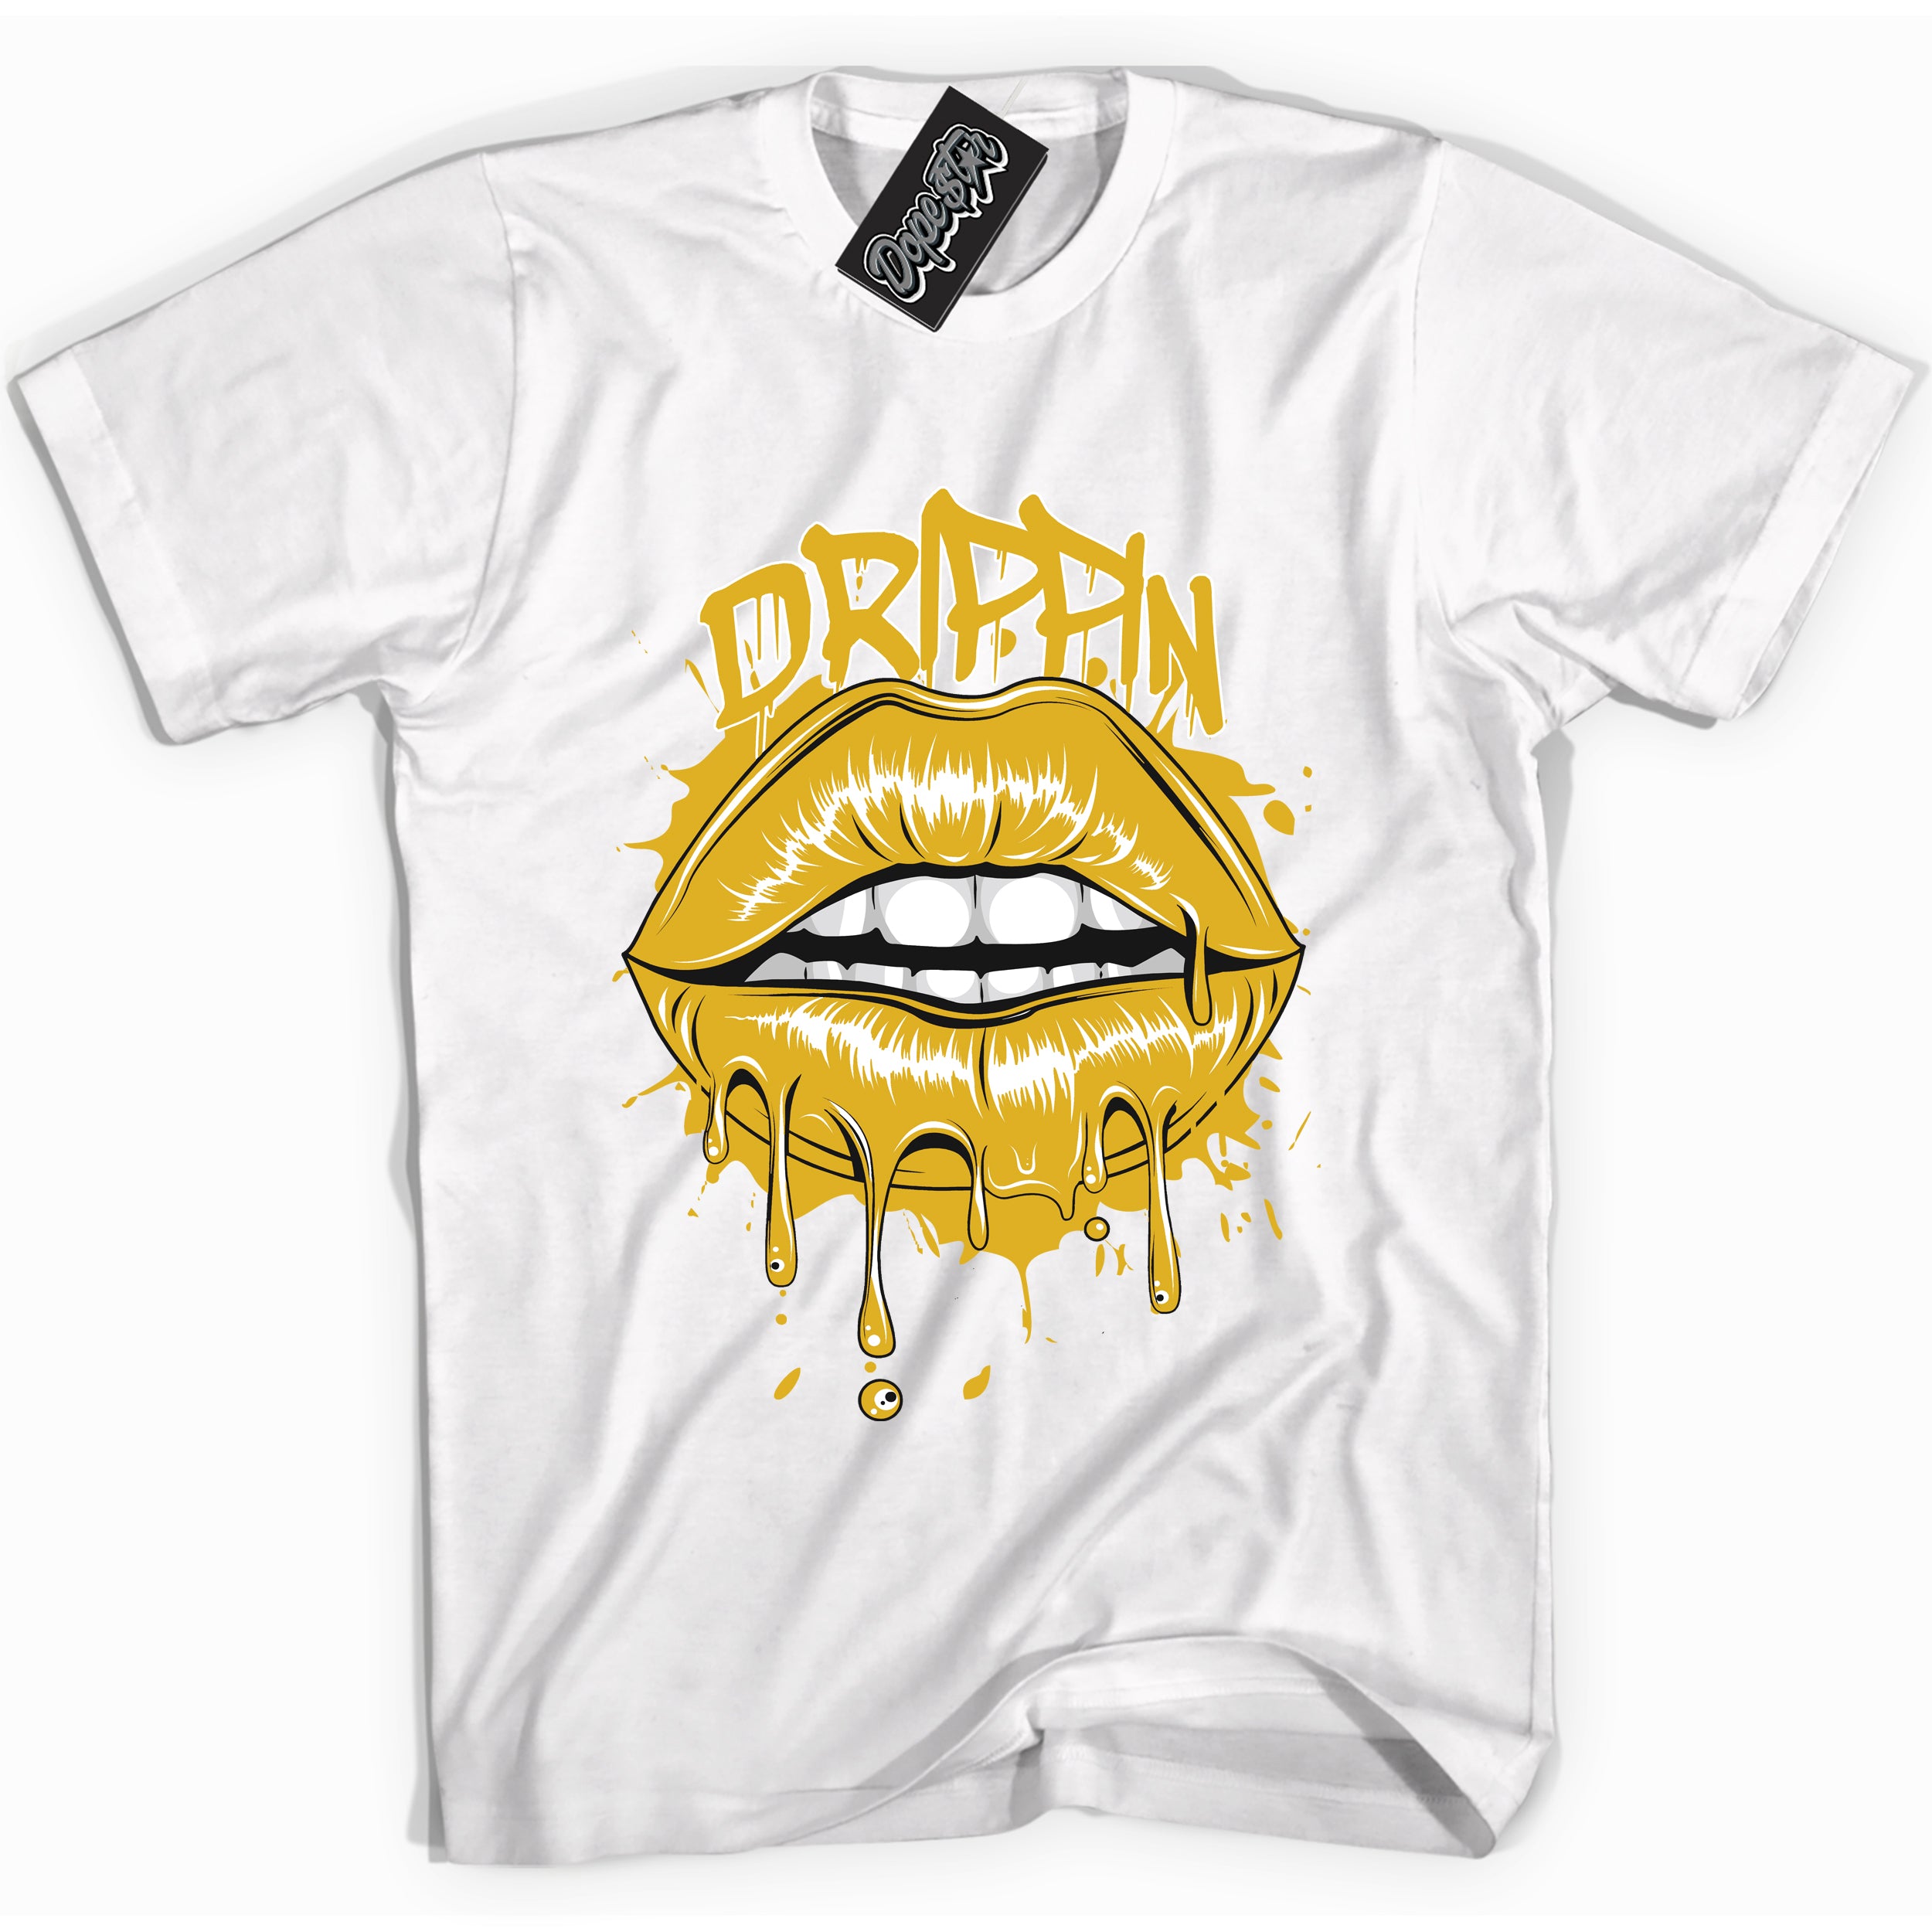 Cool White Shirt with “ Drippin” design that perfectly matches Yellow Ochre 6s Sneakers.